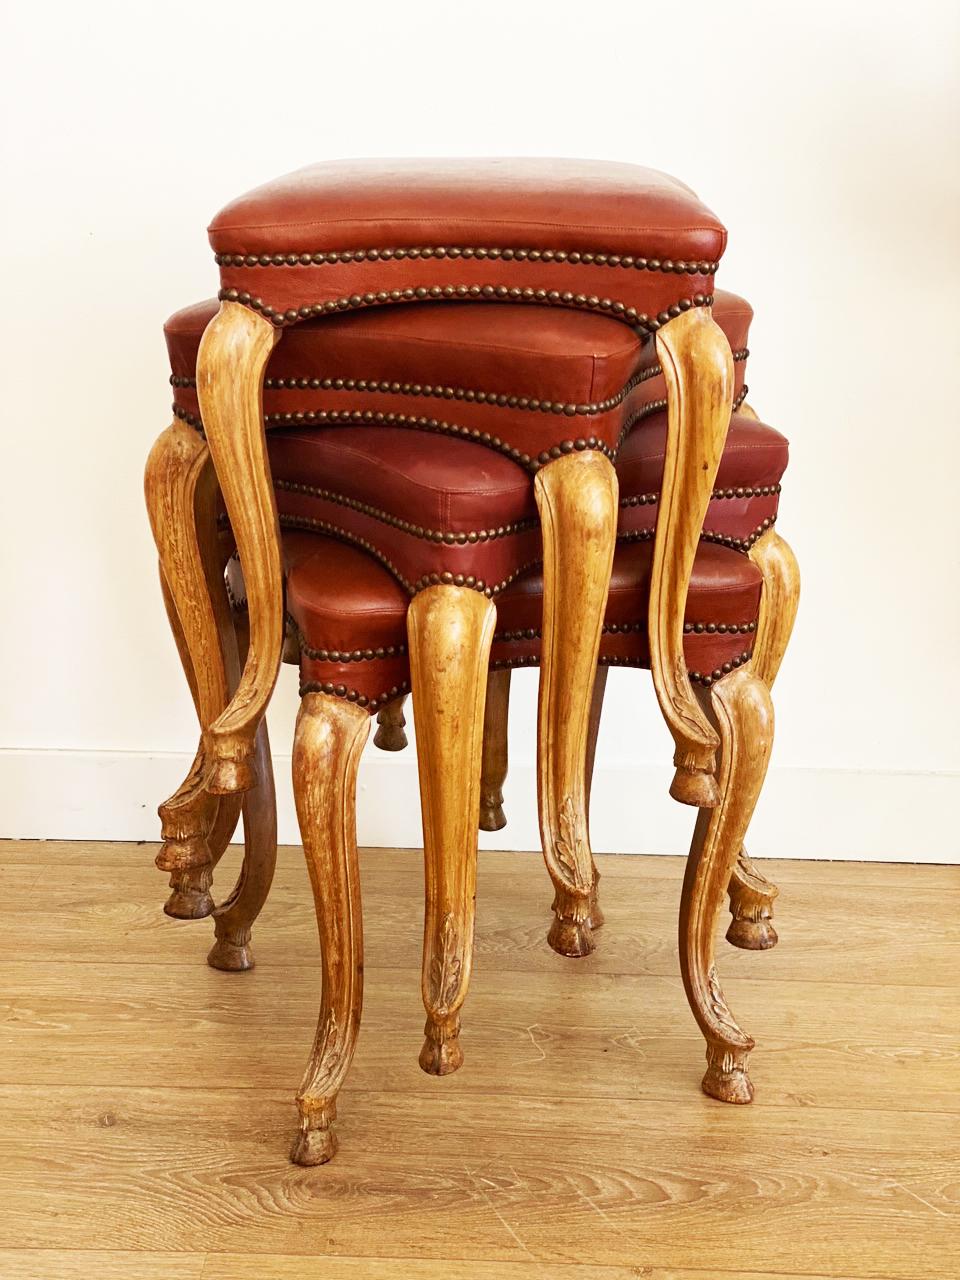 Rare set of four Regence style stackable stools, 
Walnut cabriole legs terminating in hoof feet
Original Bordeaux leatherette bordered with antique patinated brass tack nail heads
Attributed to Maison Jansen, France circa 1940
Provenance